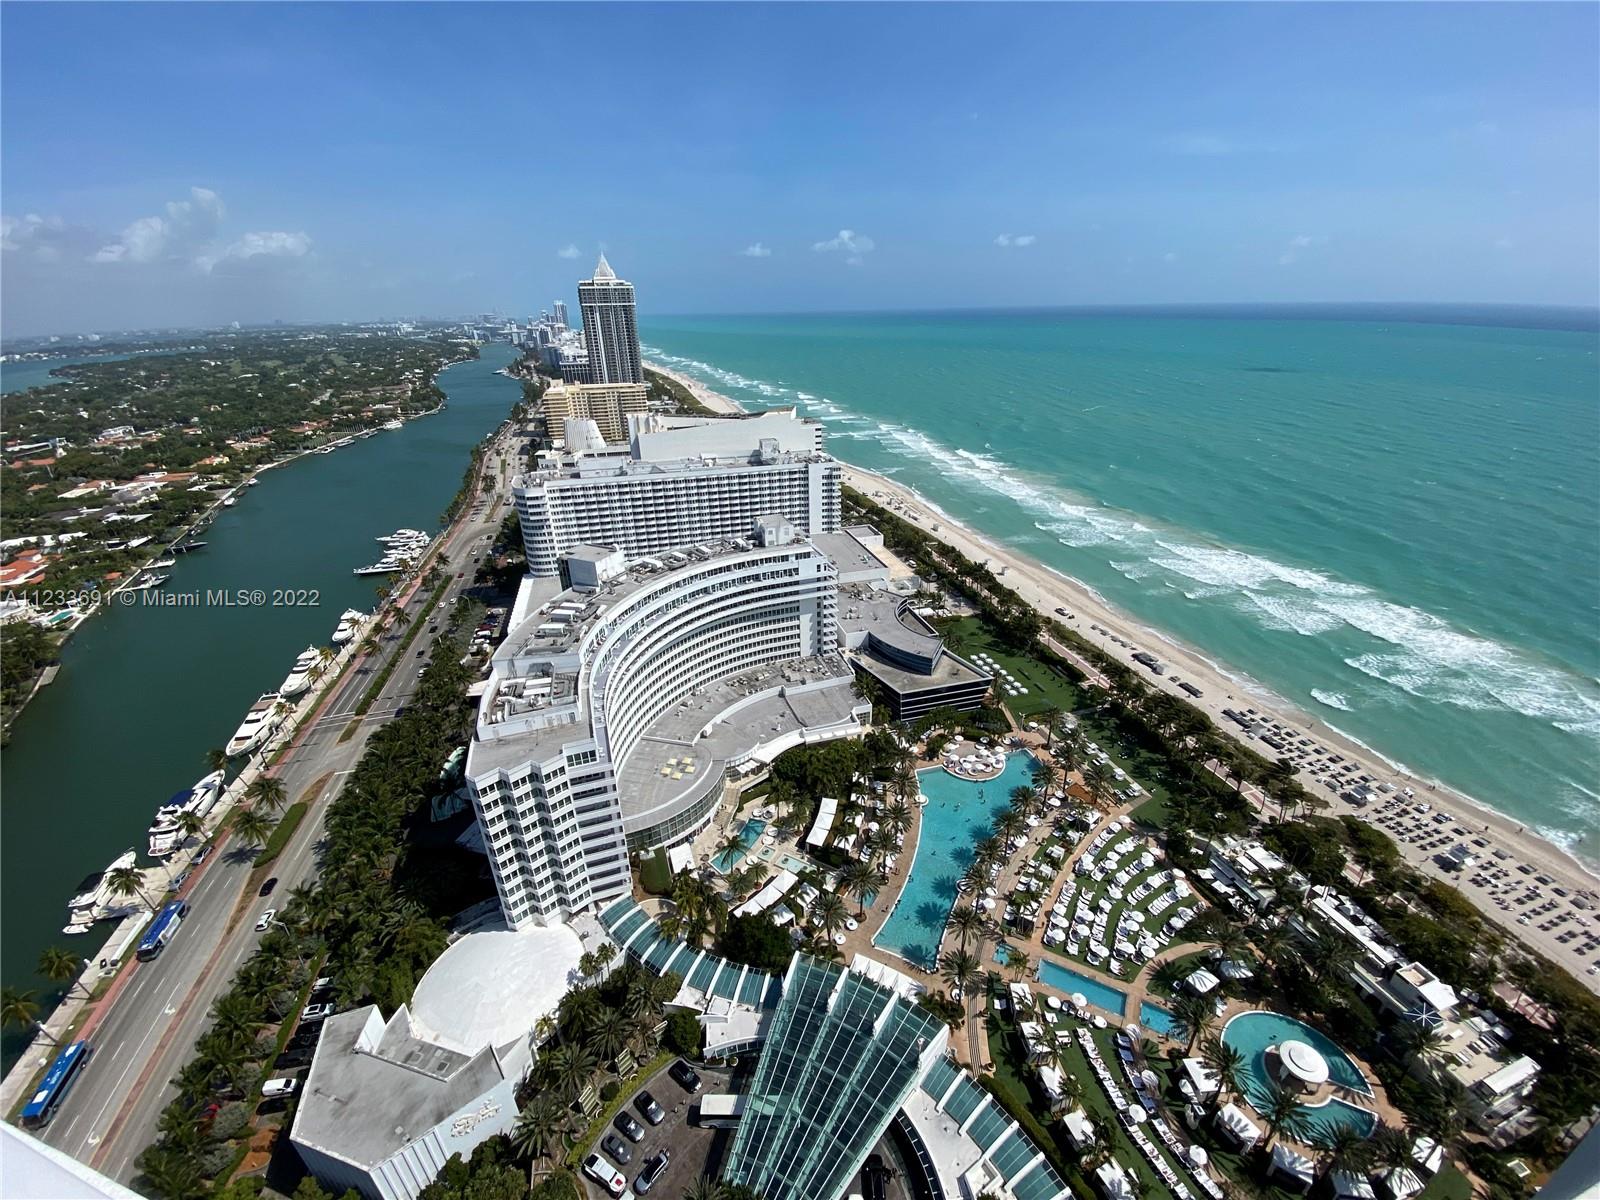 Once in a lifetime opportunity to own one or both penthouses at the iconic Fontainebleau.  The views of the Atlantic ocean, Miami beach, Biscayne Bay & the Miami skyline are simply spectacular.  This is living on a grand scale w 4500 SF interior & a massive, surrounding ter of 3300 SF w spa & shower.  The 5BD + 5BA + 2 1/2 BA unit comes fully furnished.  The great room w volume ceiling, soaring windows & the open kitchen make this PH the perfect resort-style home.  Keep a yacht at the Marina.  Elec, AC, wifi & valet included in the HOA.  The Benefit Program offers discounts on the hotel amenities such as the Lapis Spa & Hakkasan.   The Rental Program provides worry-free ownership & no rental restrictions.   PH rental demand will increase w the 50,000SF event center completion in 2025.